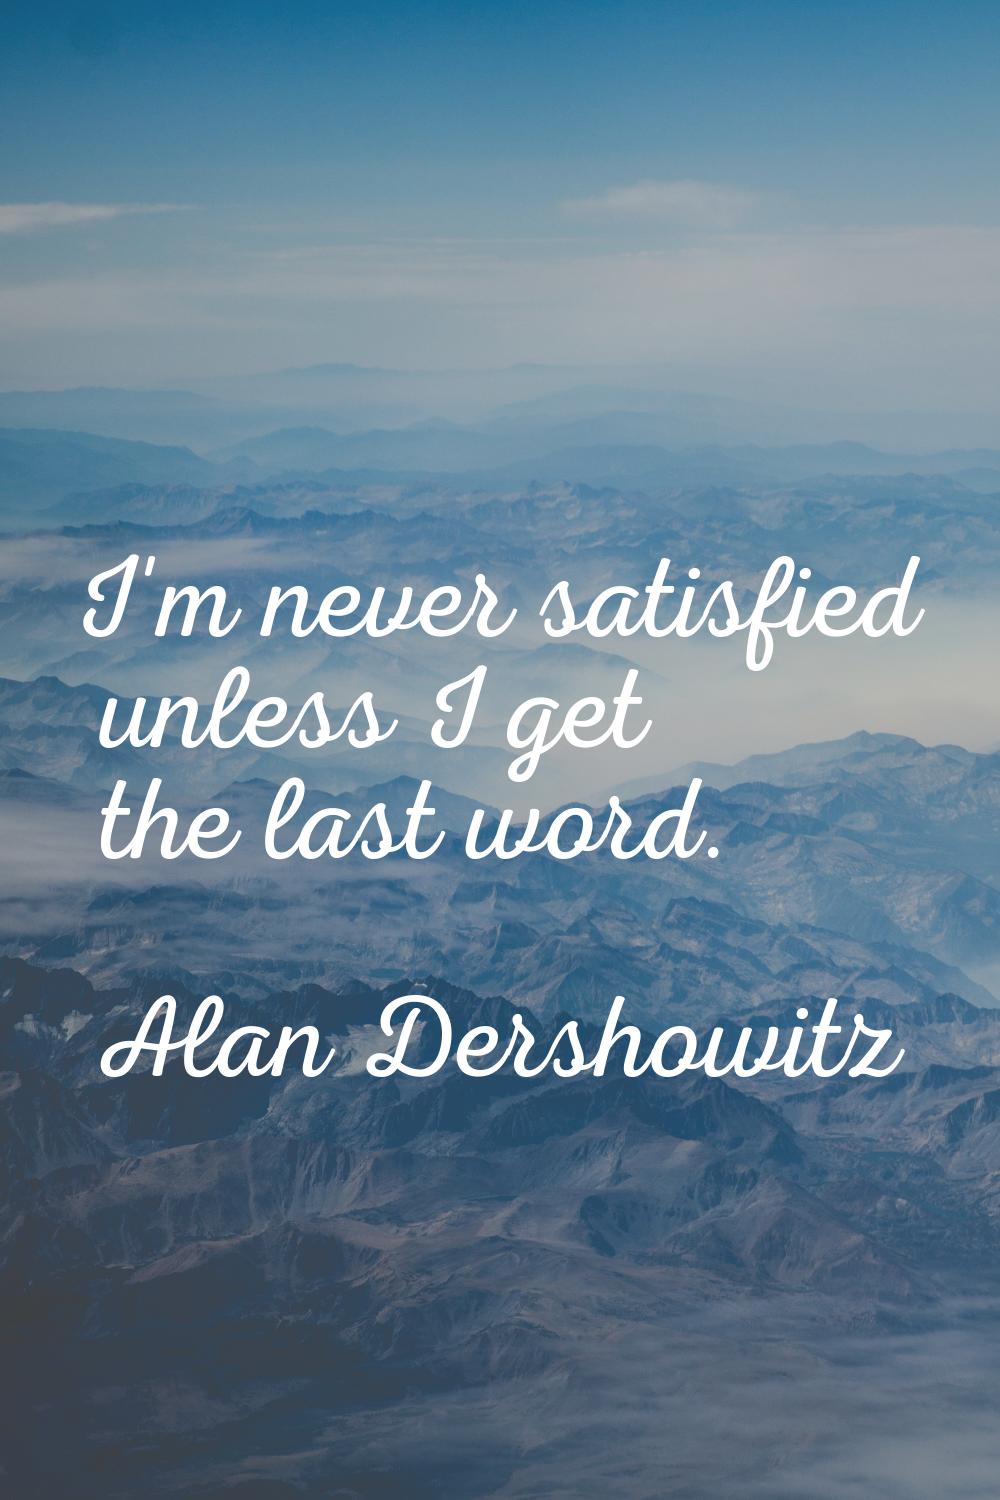 I'm never satisfied unless I get the last word.